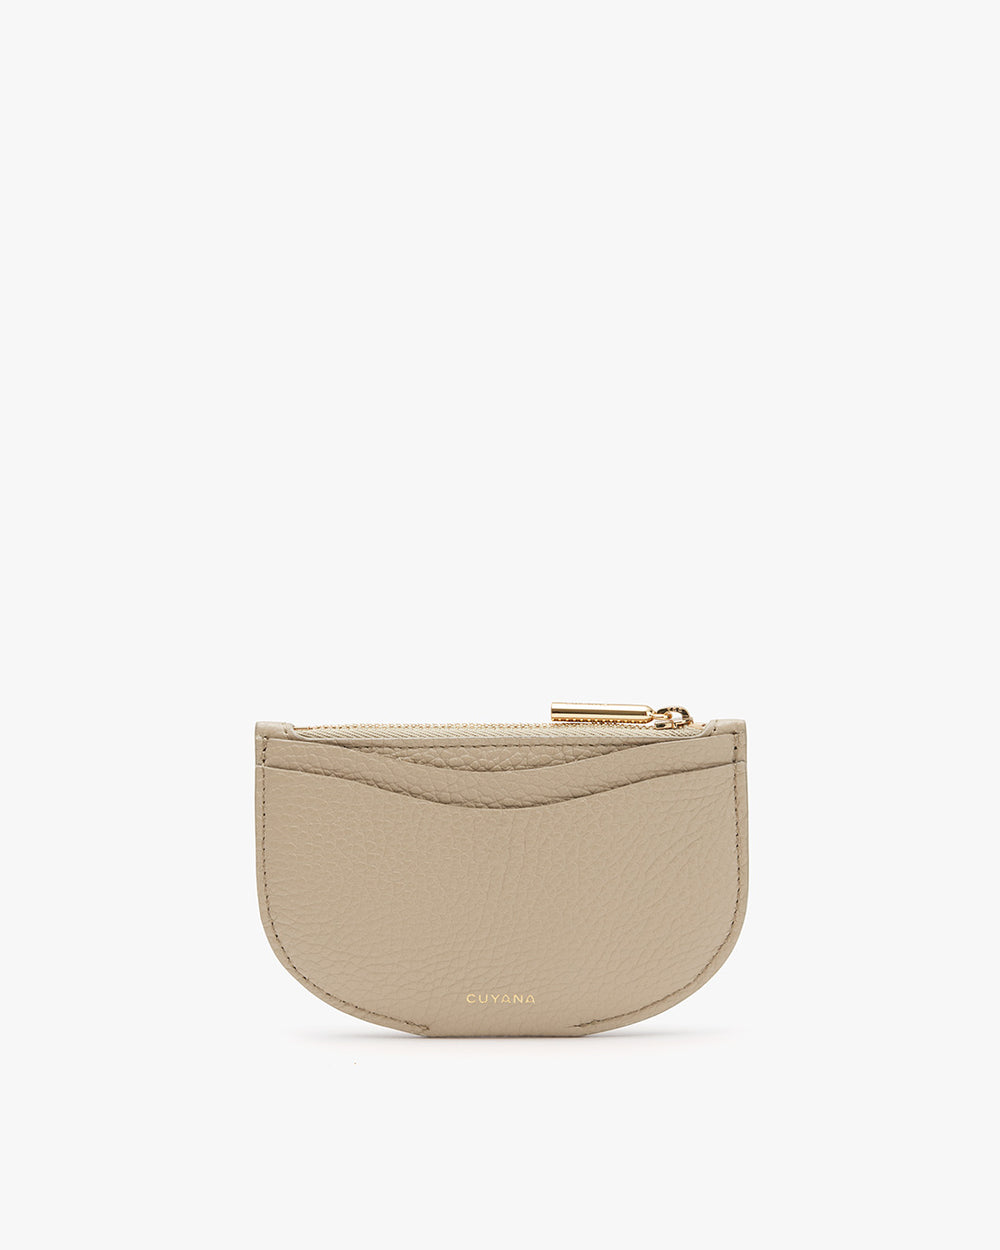 Small zippered purse displayed against a plain background.